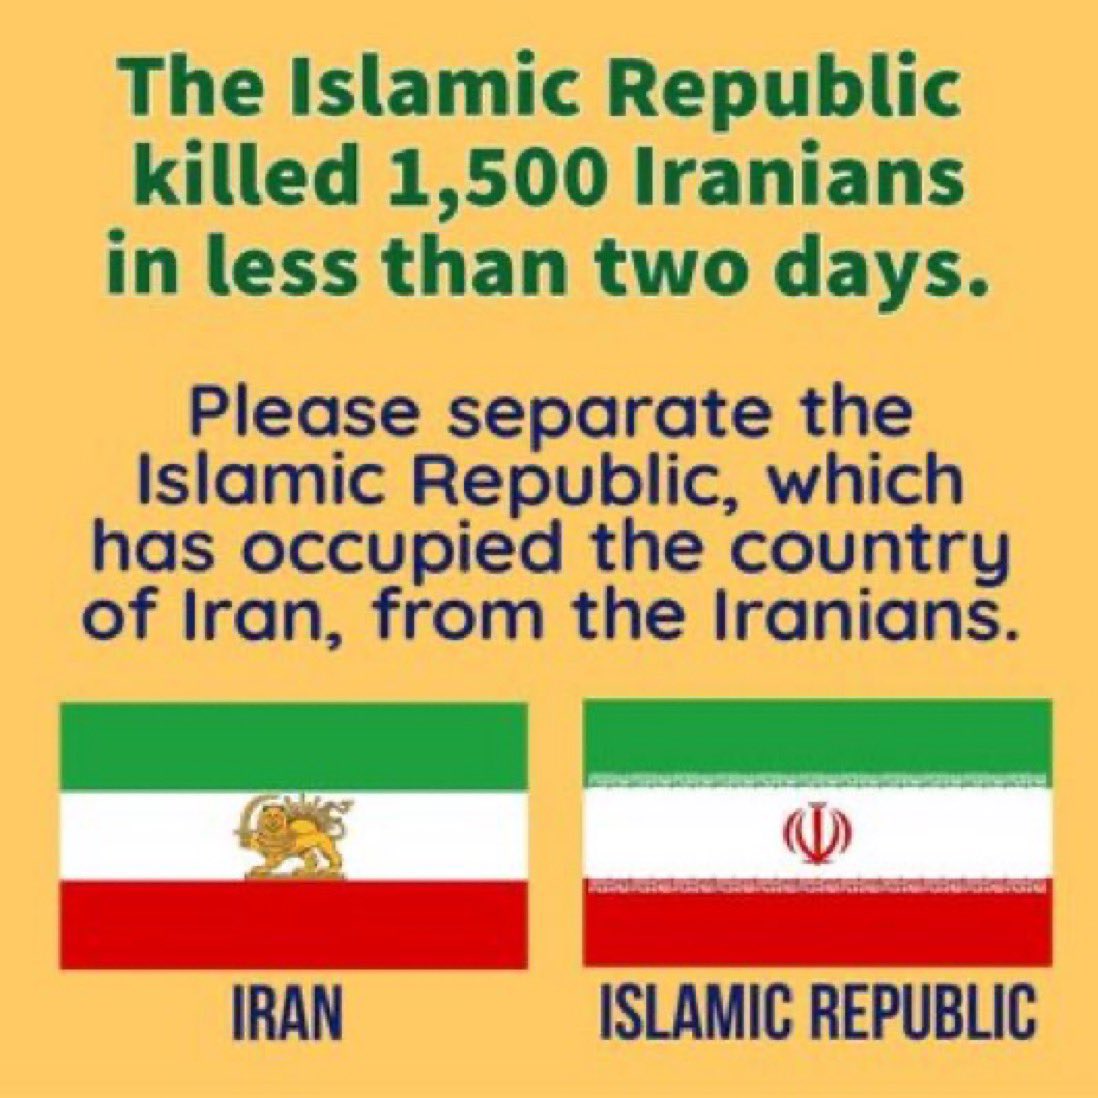 Hey,  world know that the authorities of the aggressor Islamic Republic who claim to support American or European students are criminals and looters who shoot and beat Iranians in Iran. 
Iran has been occupied for 45years by this illegitimate fashist regime.
#Genocide_in_Iran